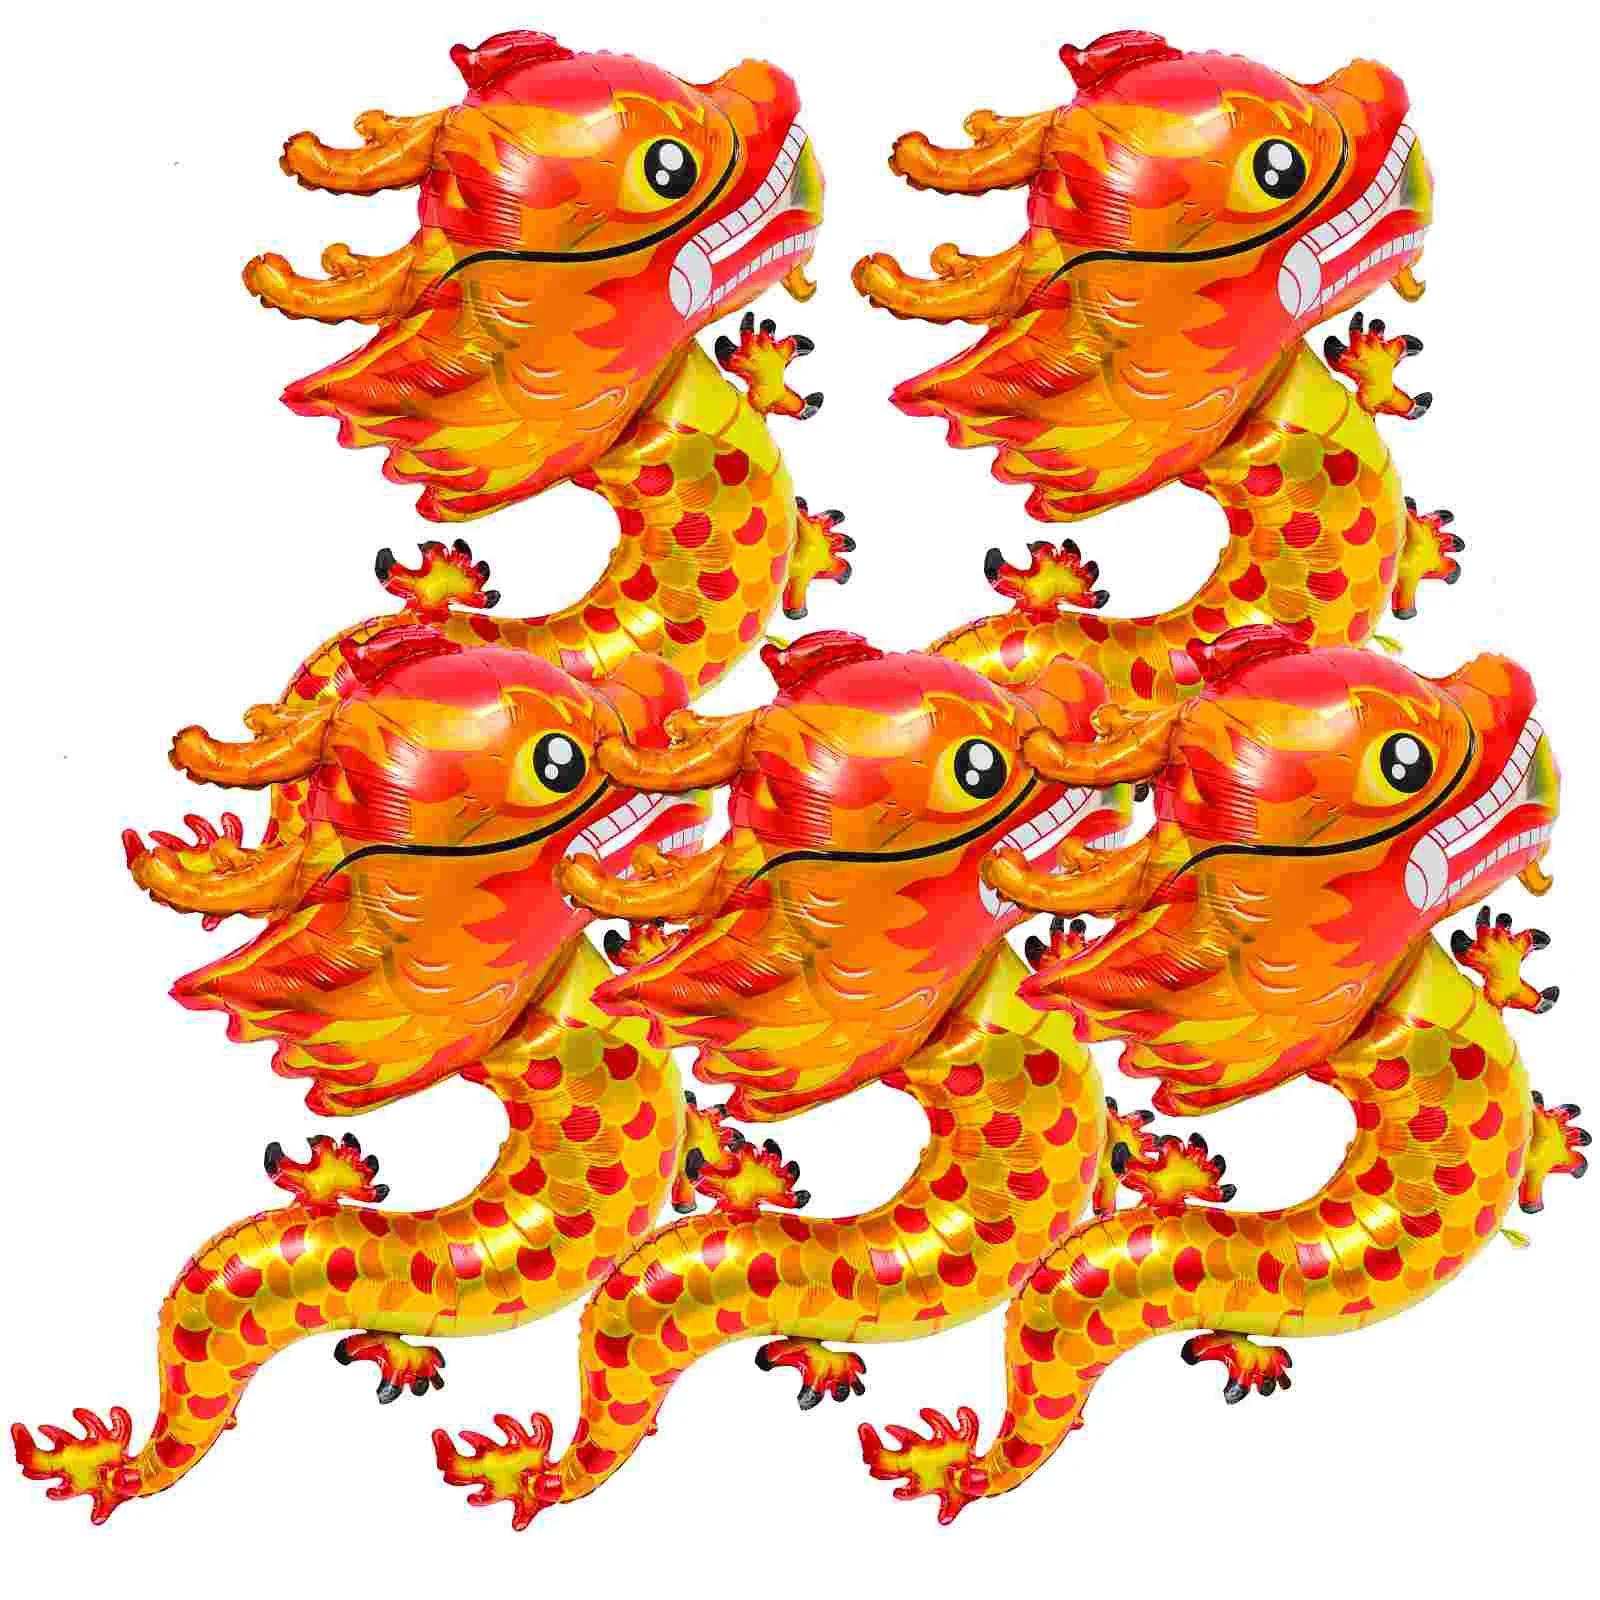 

3D Chinese Flying Dragon Foil Balloons Cartoon Animal Zodiac Chinese New Year Balloon Kids Gifts Globos Xmas Party Home Supplies